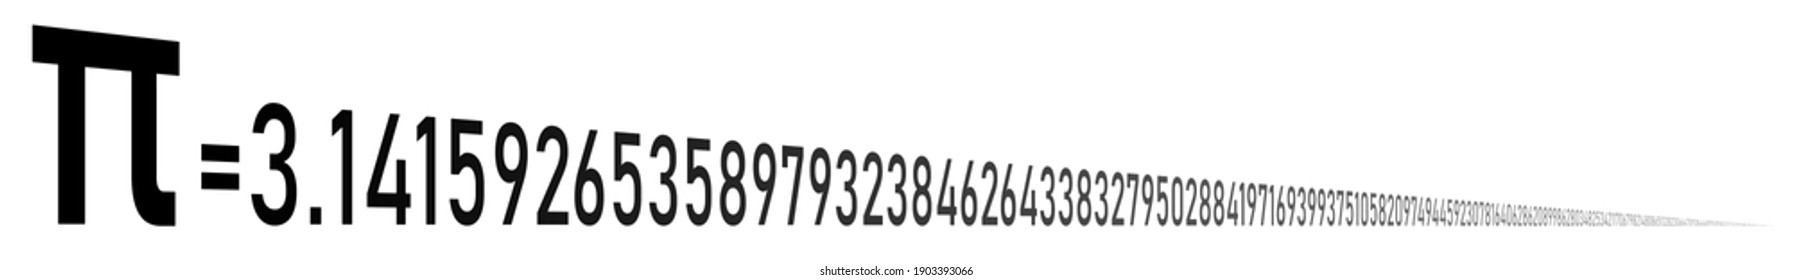 Happy PI day March 14th mathematical number banner background illustration